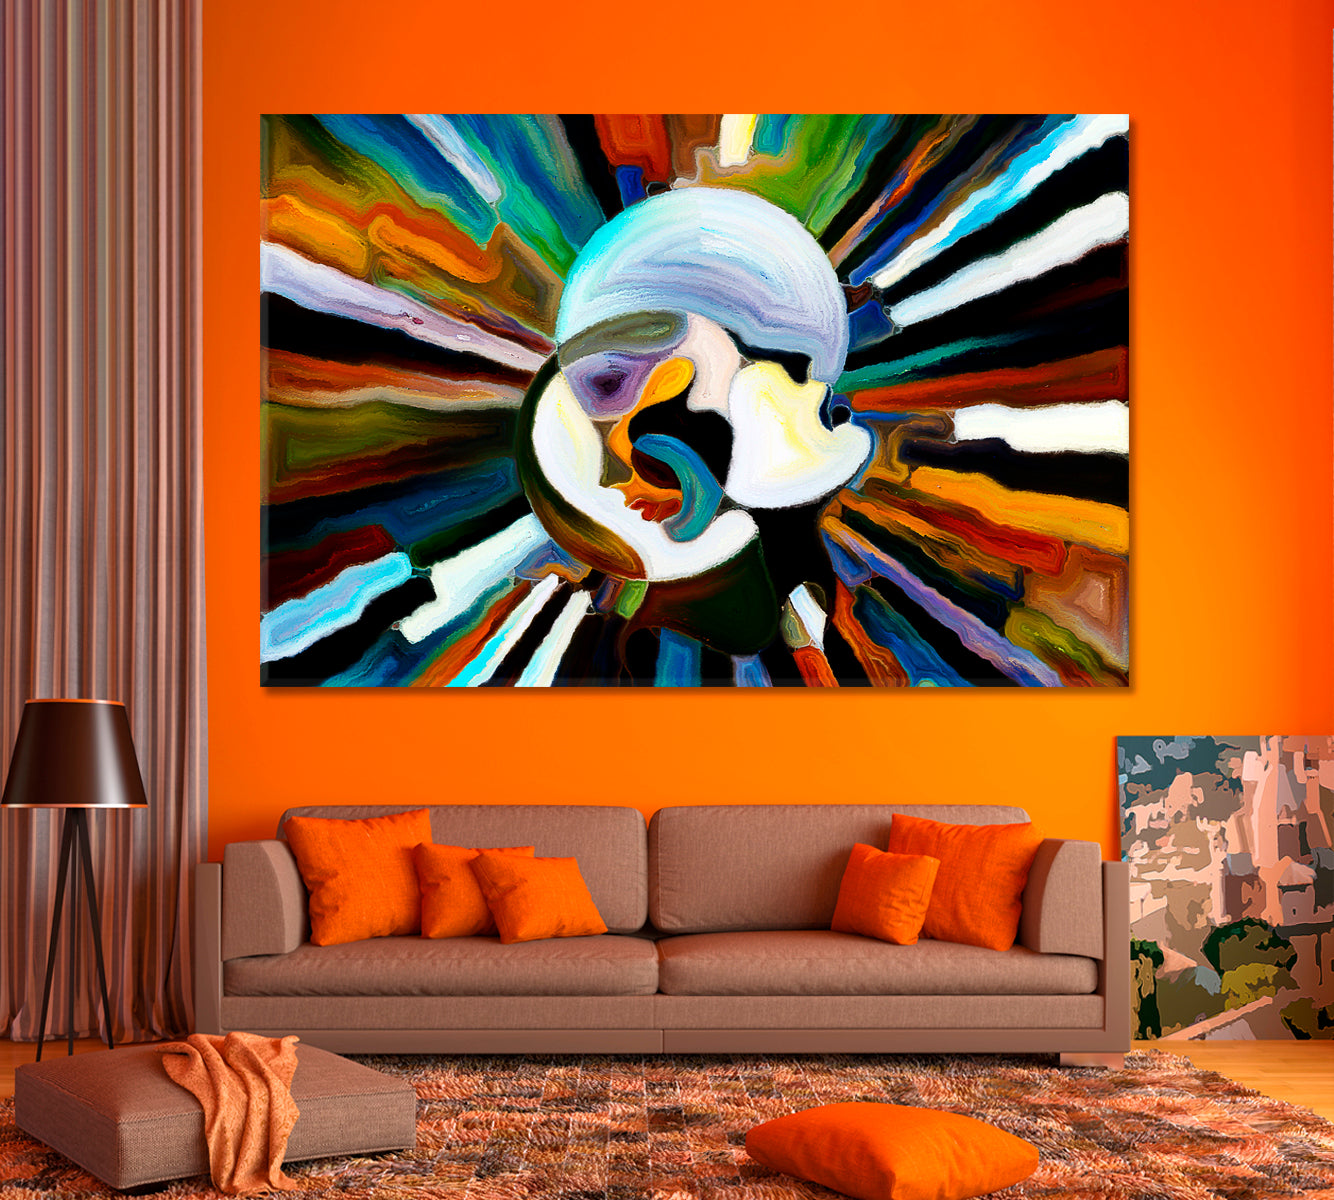 Think Different, Human Profiles Abstract Patterns And Colors Abstract Art Print Artesty 1 panel 24" x 16" 